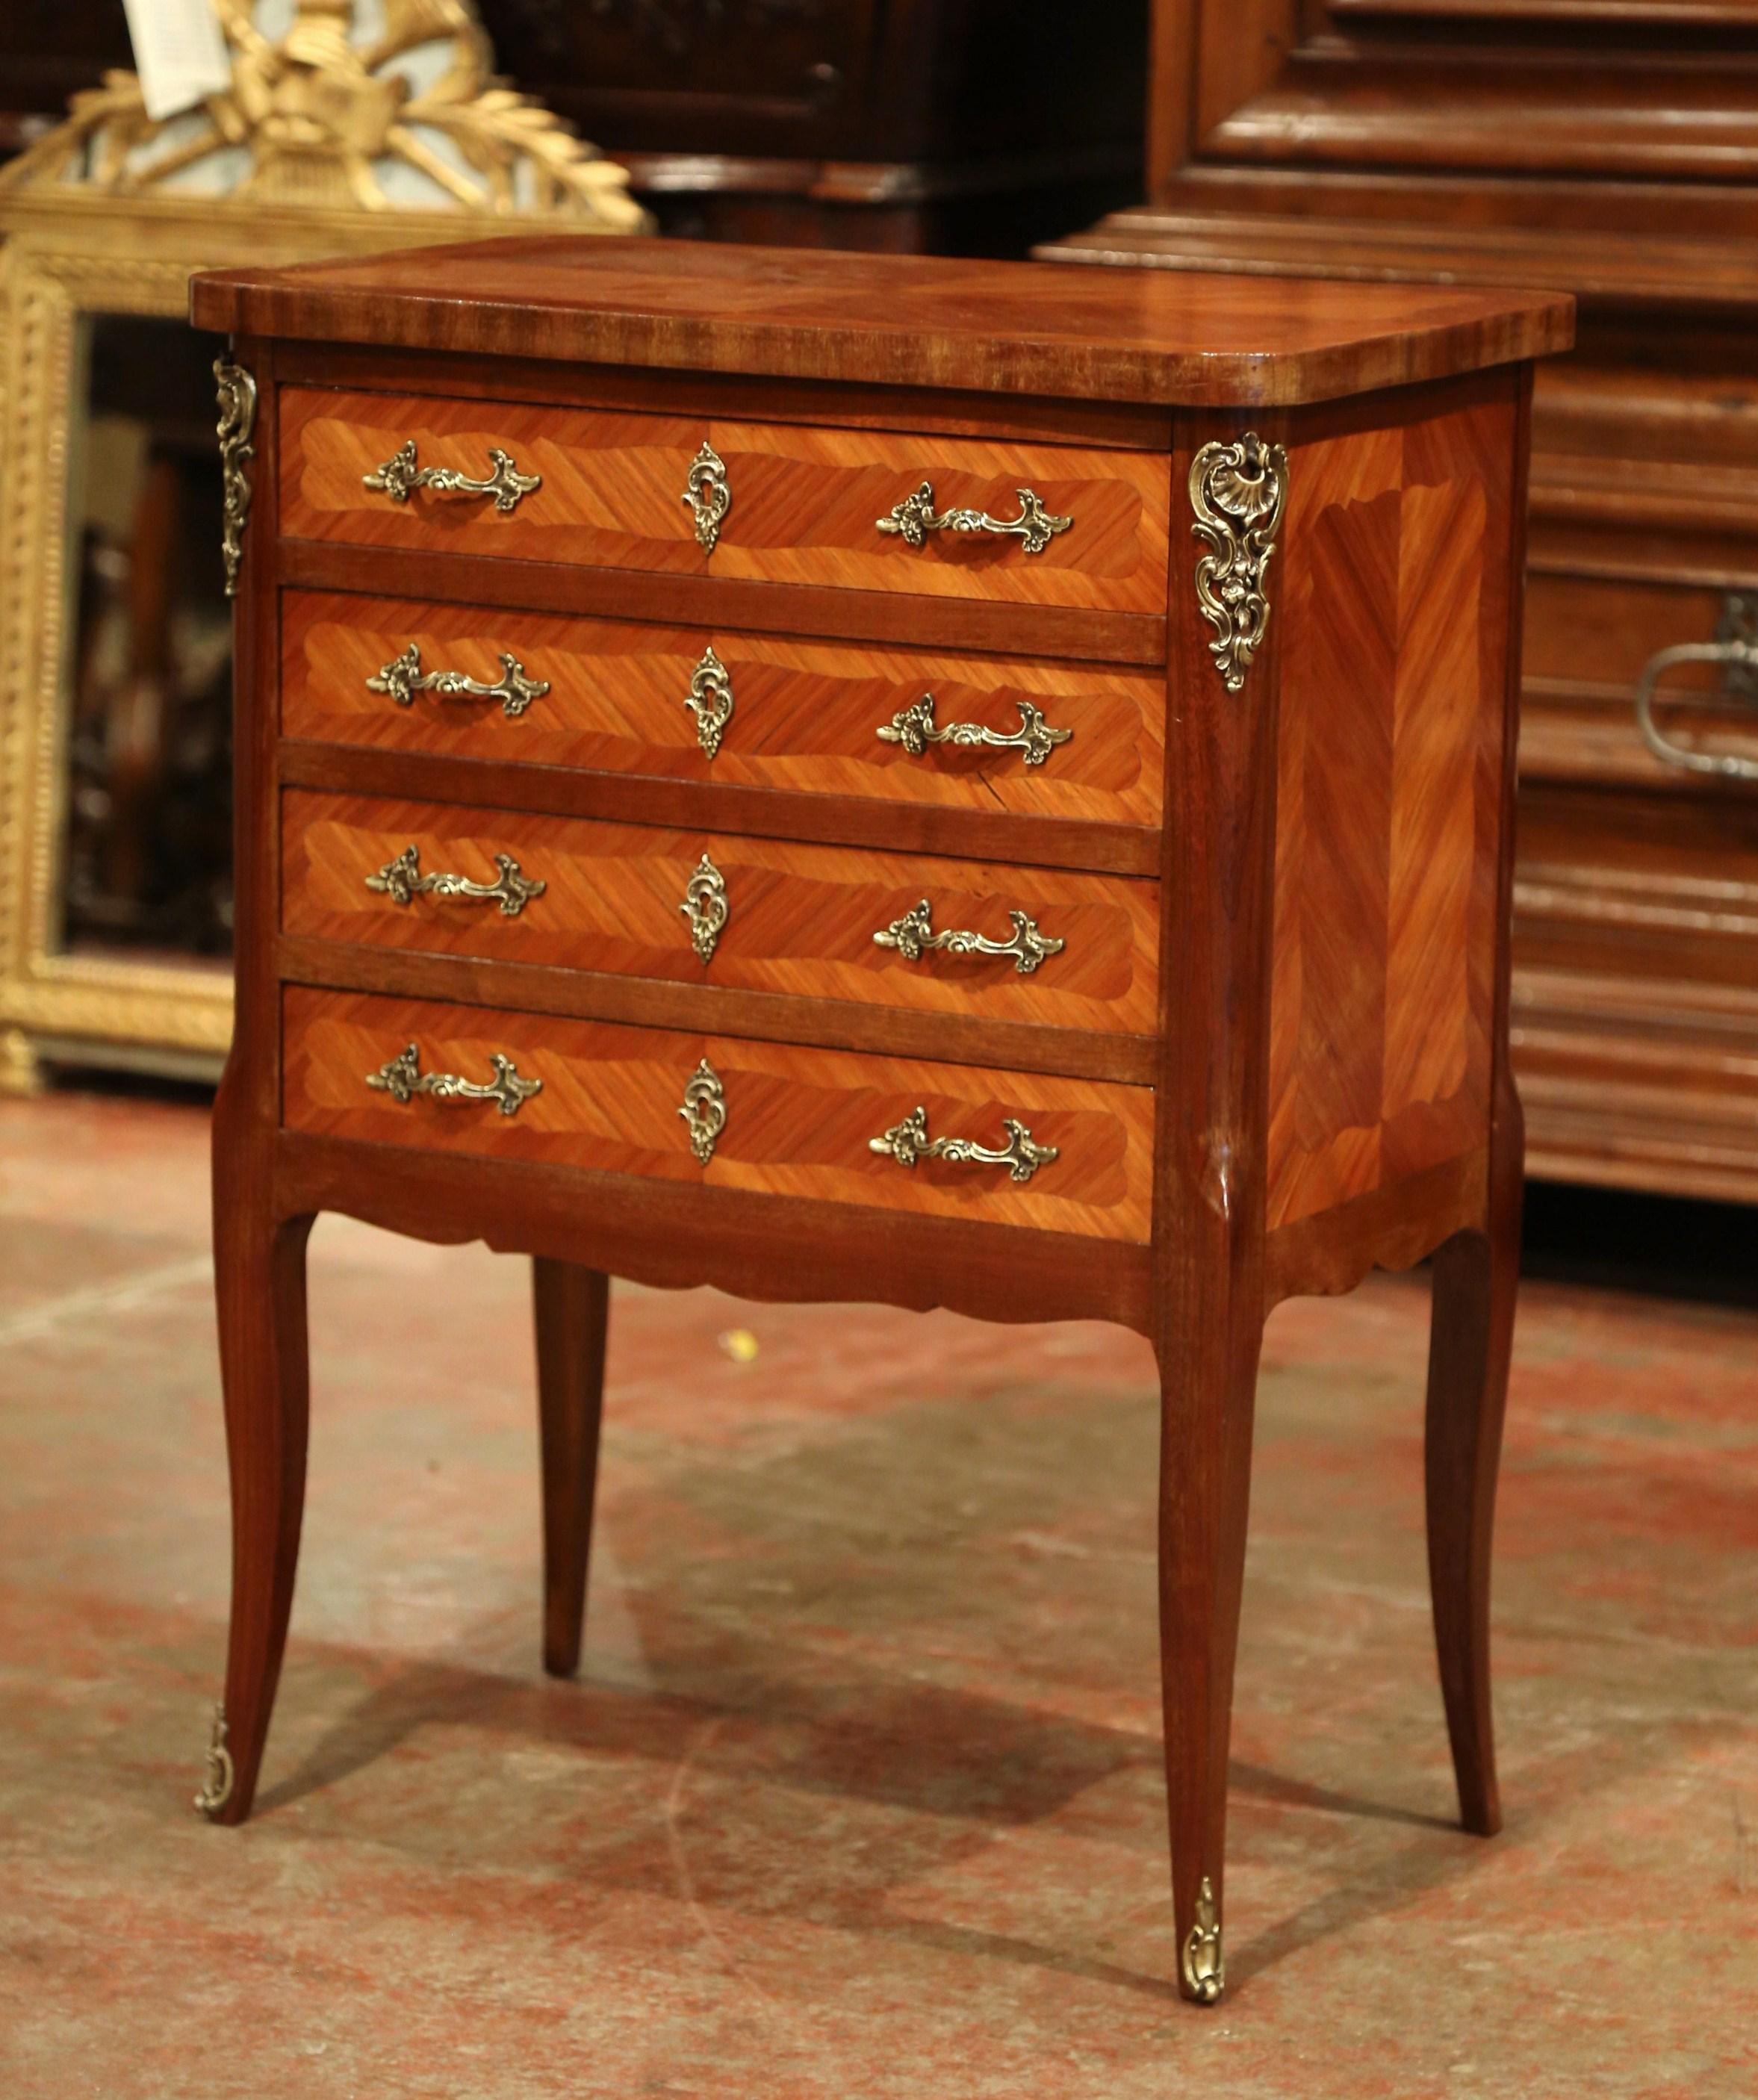 This elegant, Louis XV antique walnut commode is an essential for entertaining. Created, circa 1920, the chest is outfitted with a complete menagere flatware set with an impressive 145 pieces. The traditional four-drawer chest is not only a